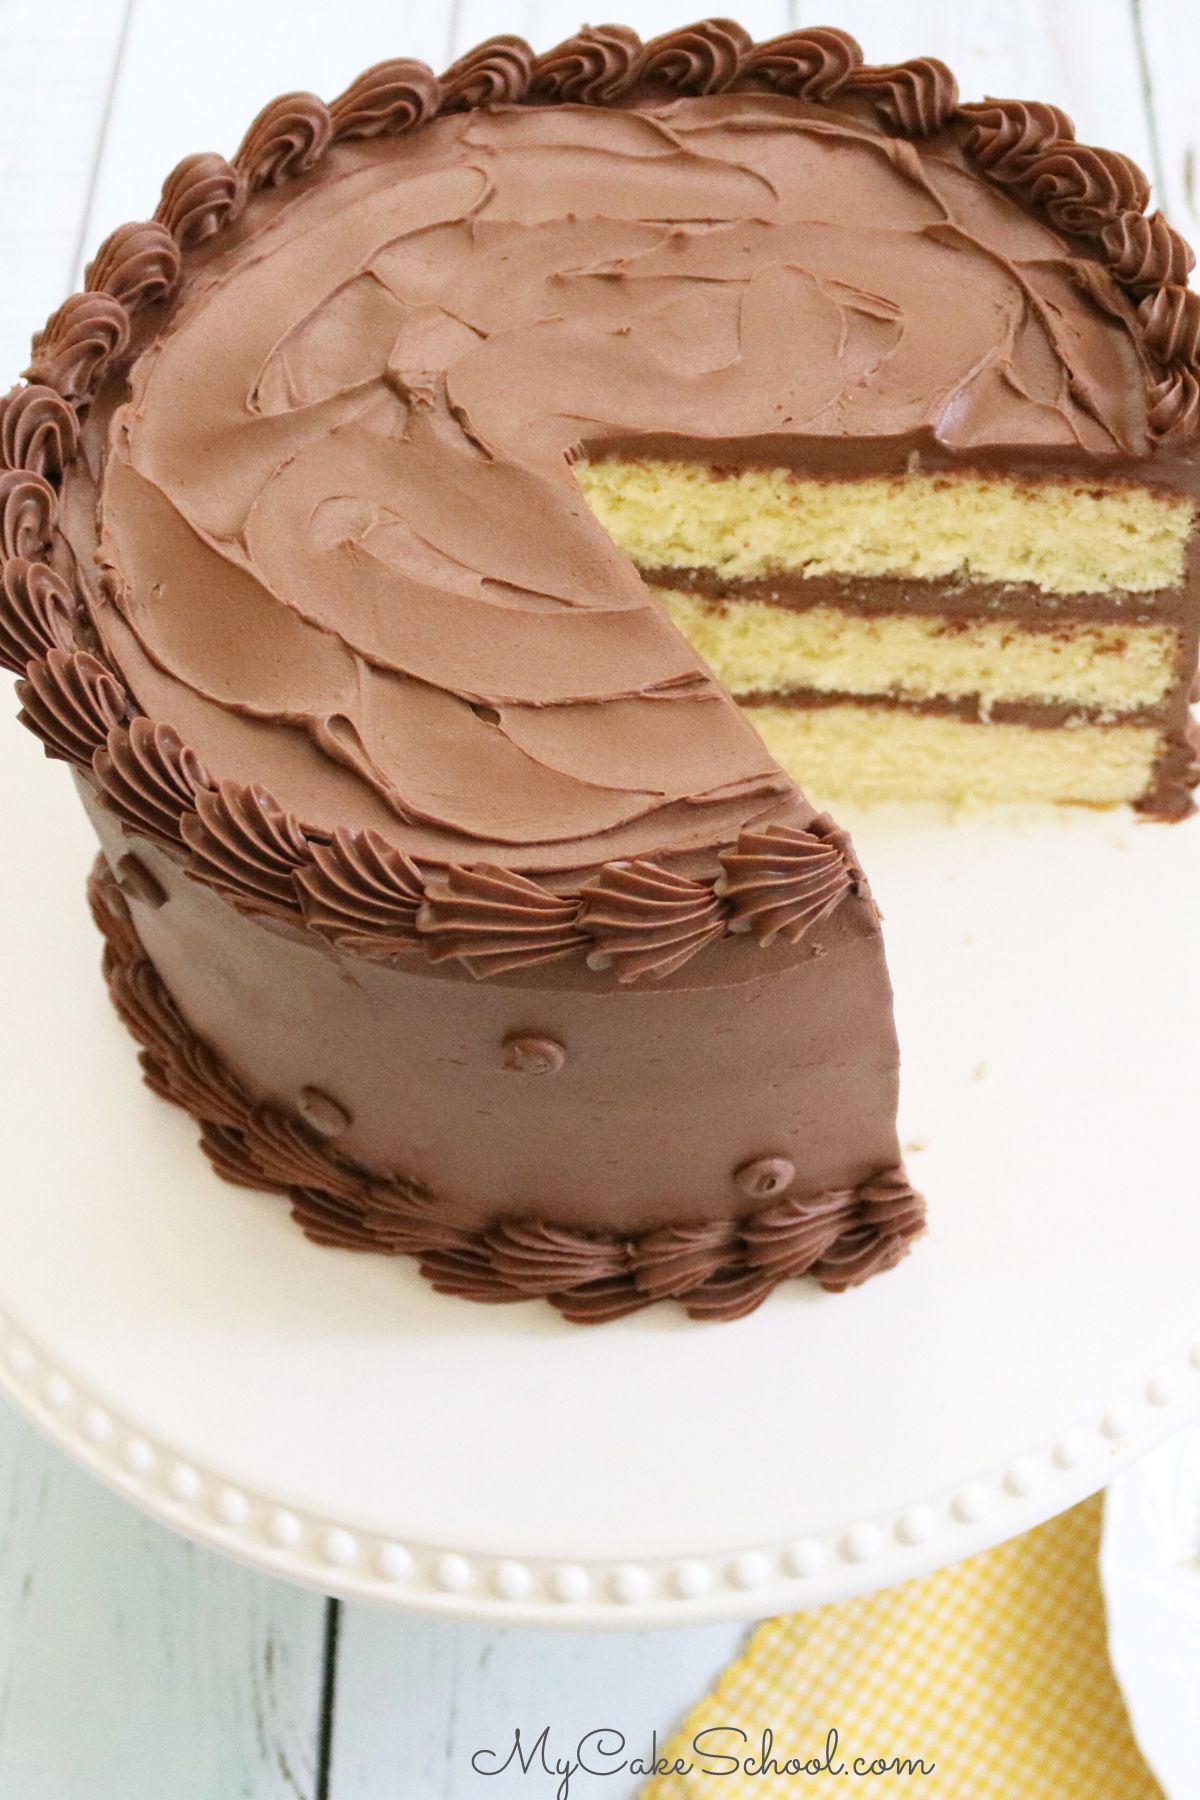 Sliced yellow cake from scratch on a white pedestal, frosted in chocolate buttercream.